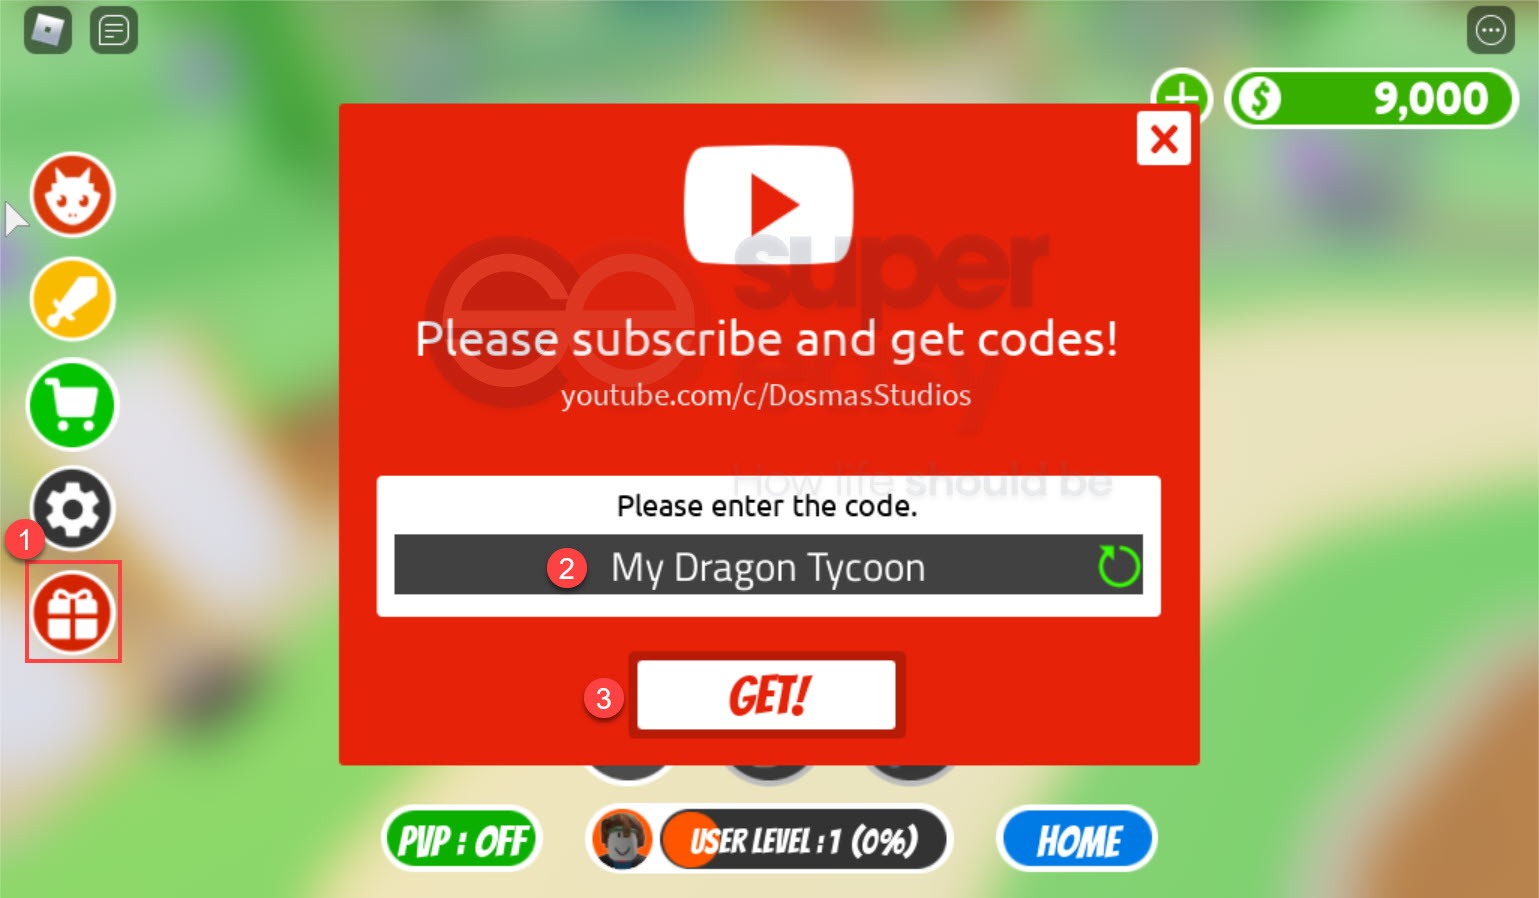 How to redeem My Dragon Tycoon codes